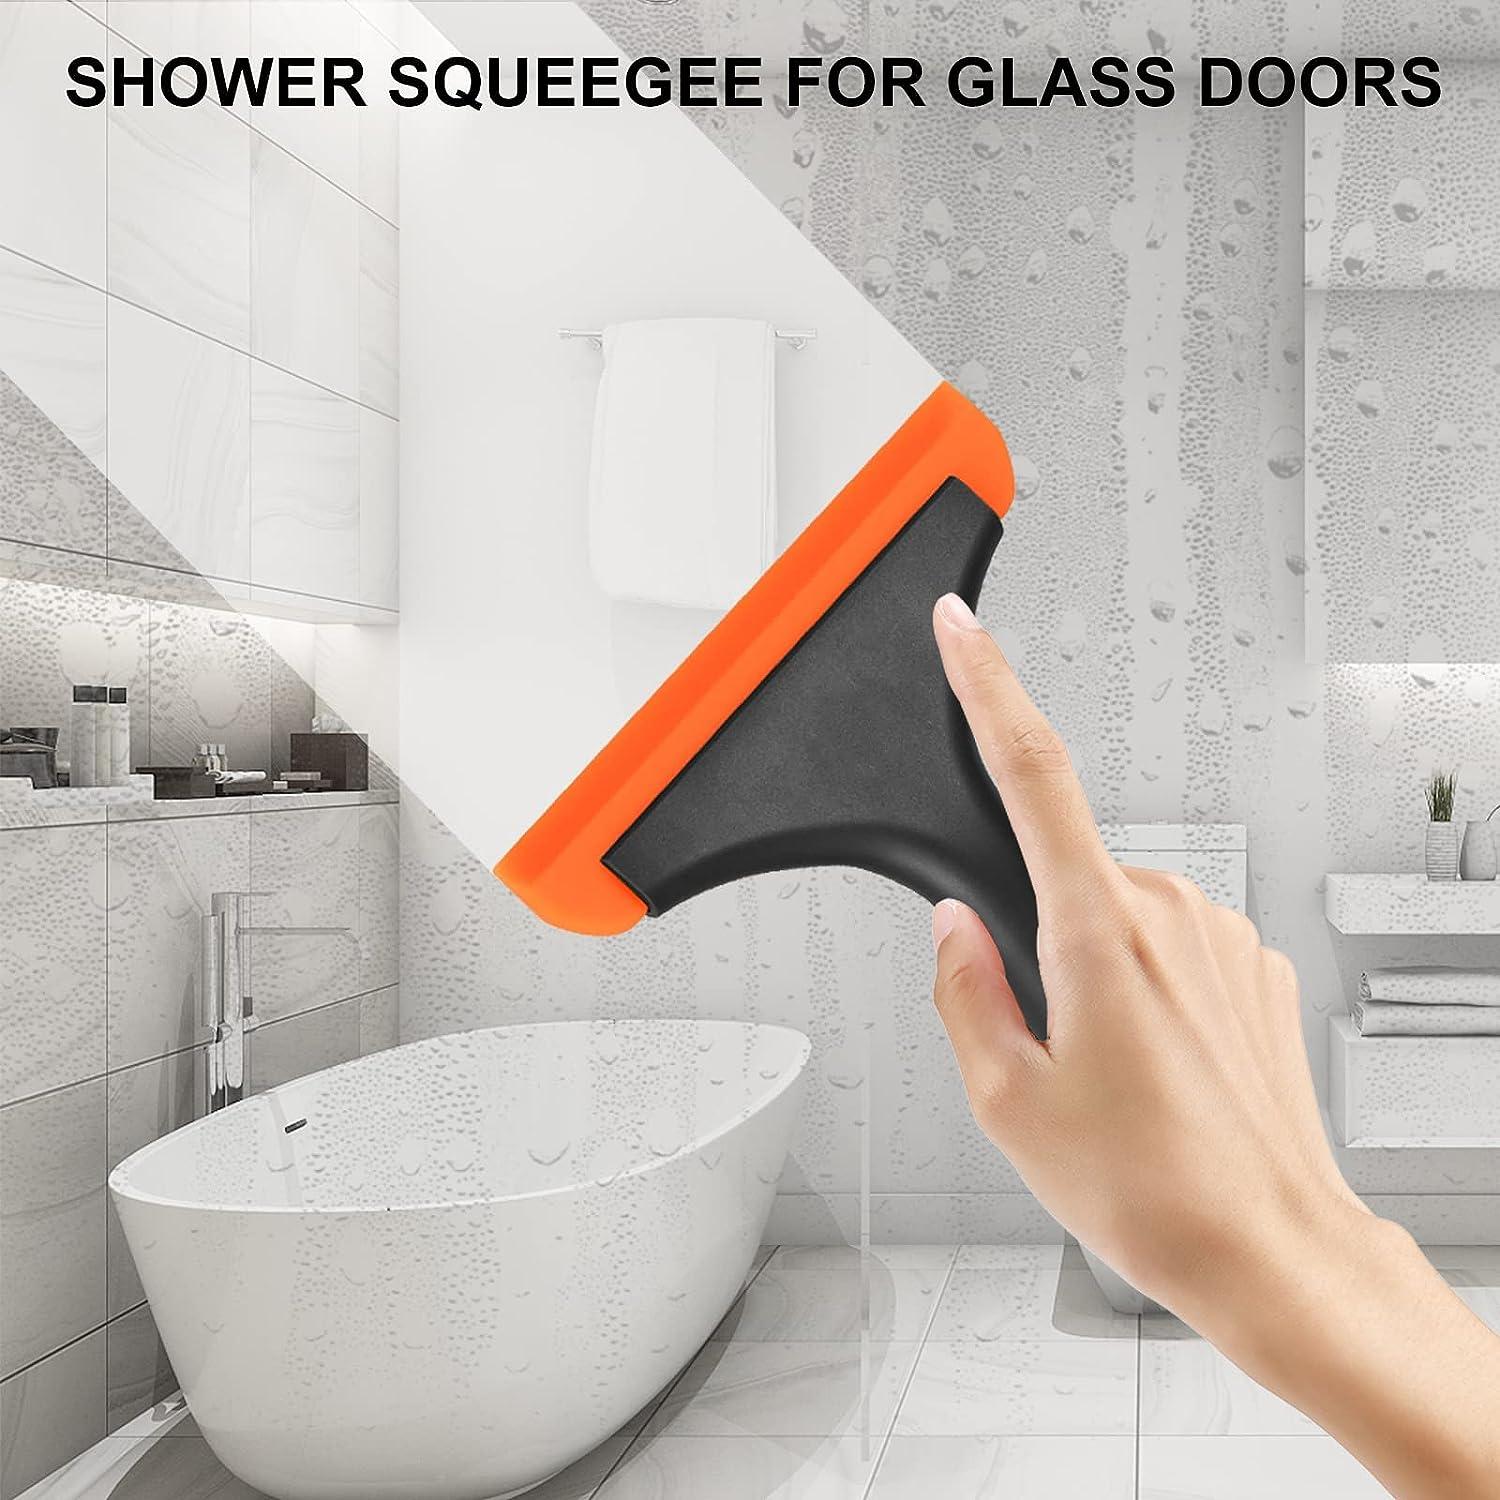  SetSail Squeegee for Shower Glass Door, All-Purpose